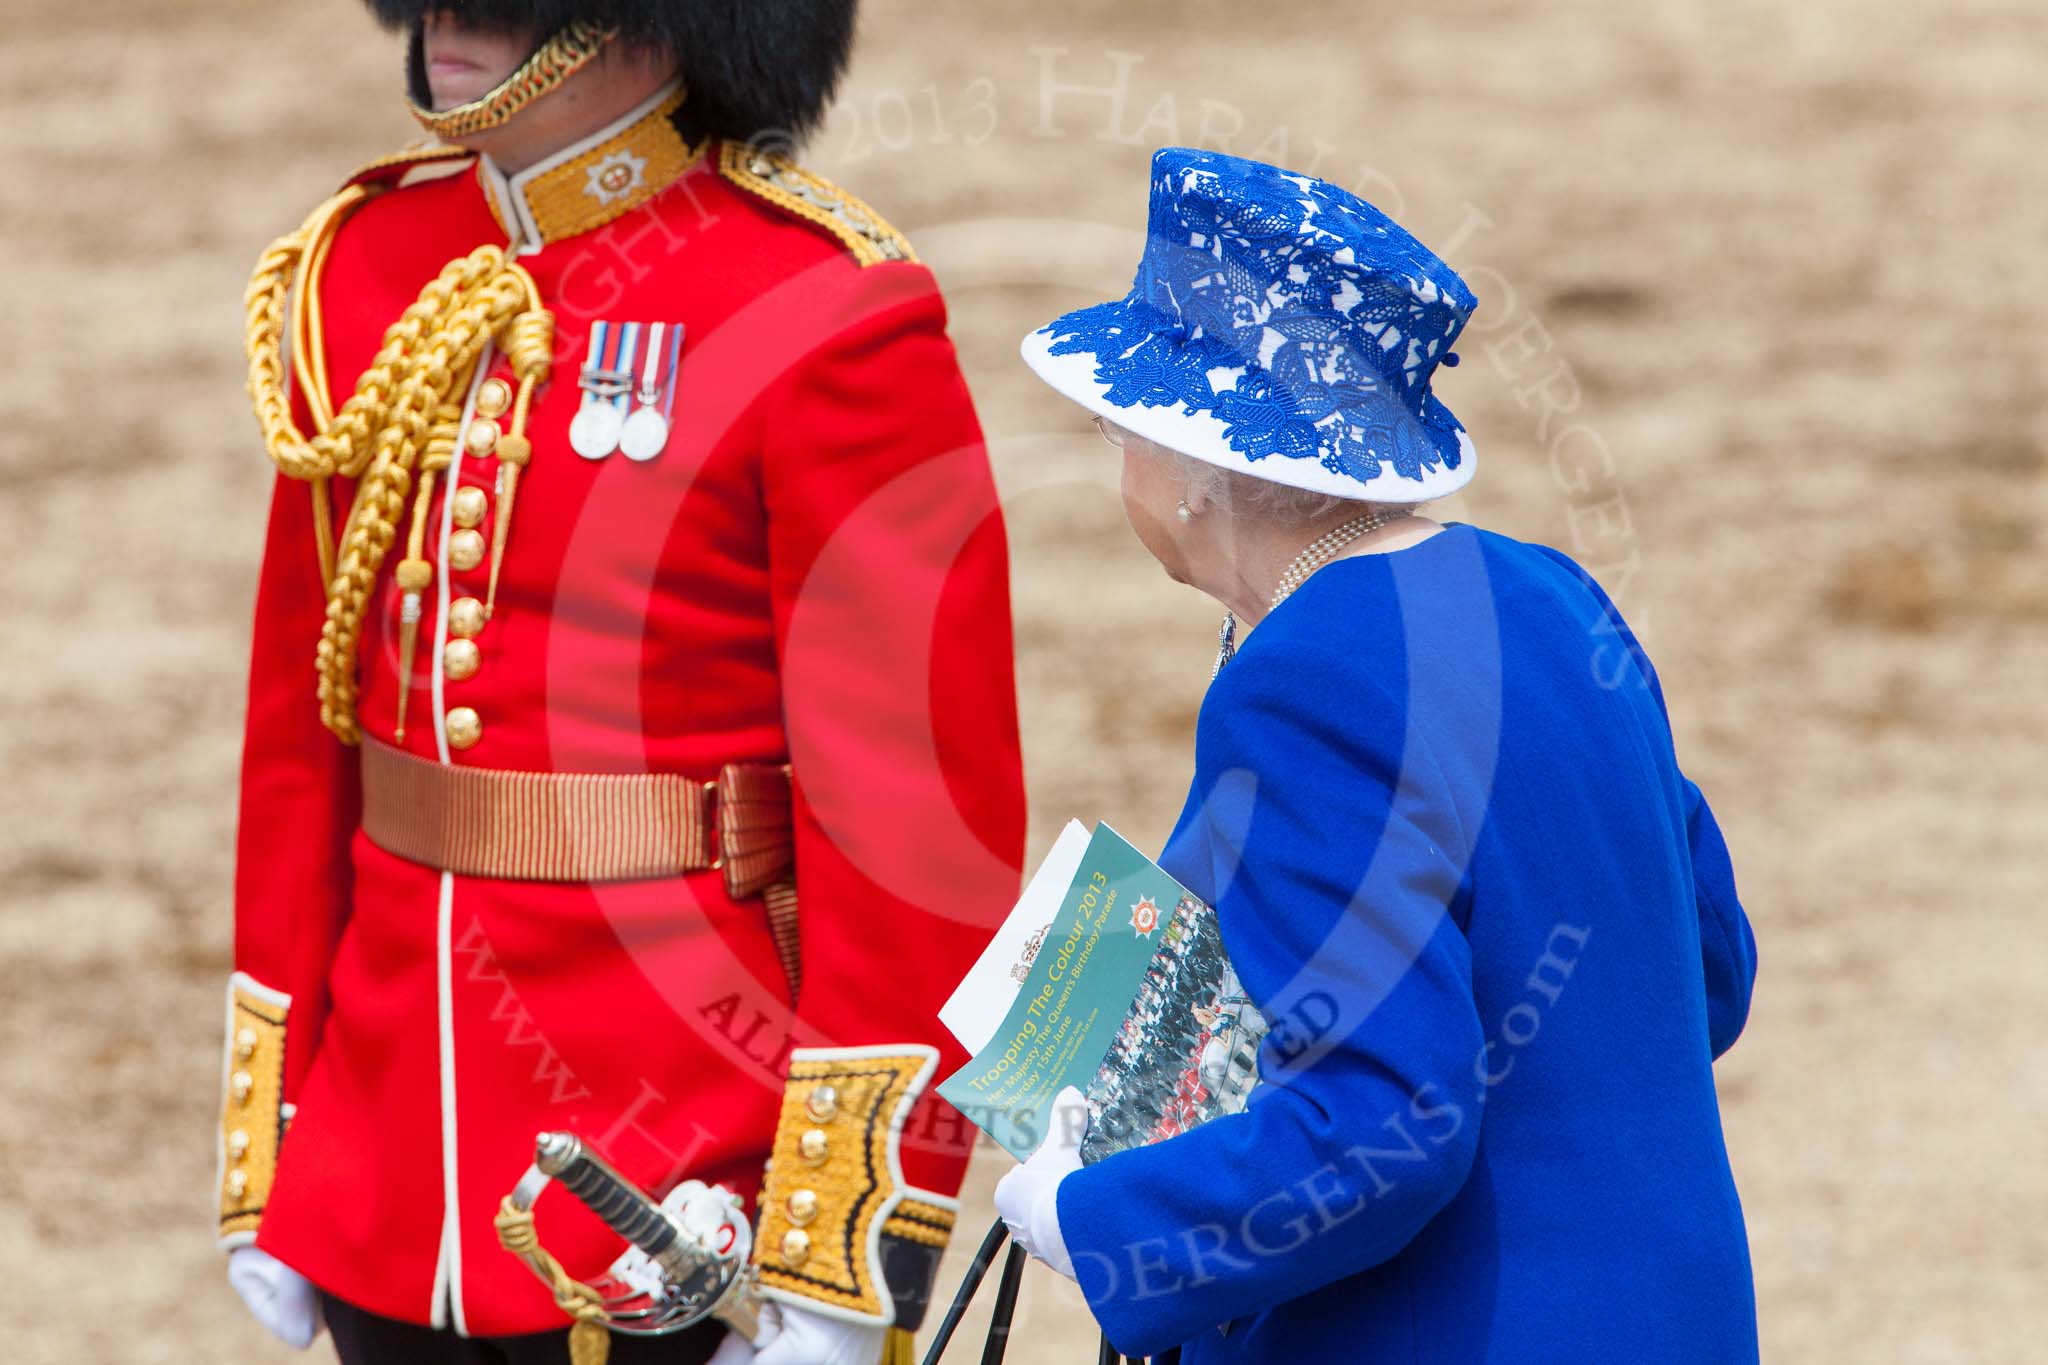 Trooping the Colour 2013: HM The Queen is leaving the dais, walking towards the glass coach. Image #802, 15 June 2013 12:09 Horse Guards Parade, London, UK